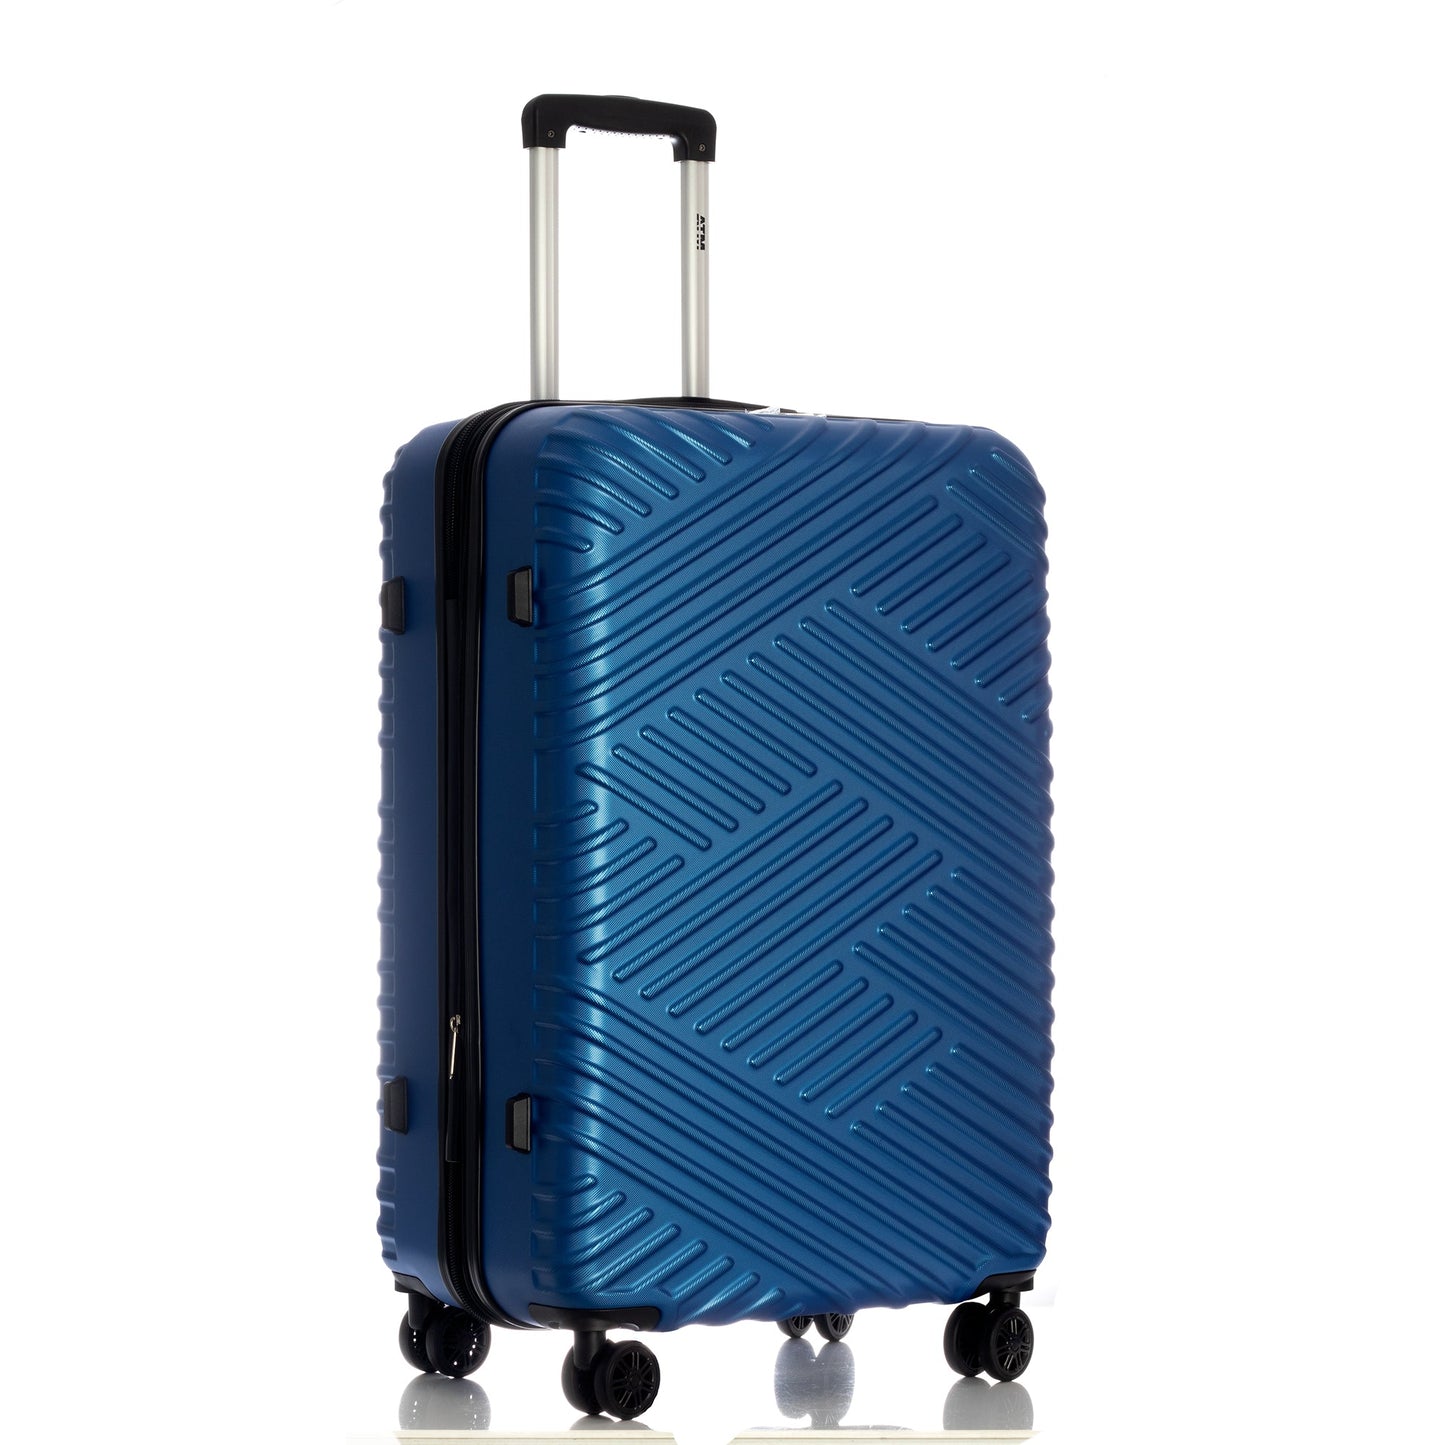 Neon Collection Blue luggage (21/25/29") Suitcase Lock Spinner Hardshell